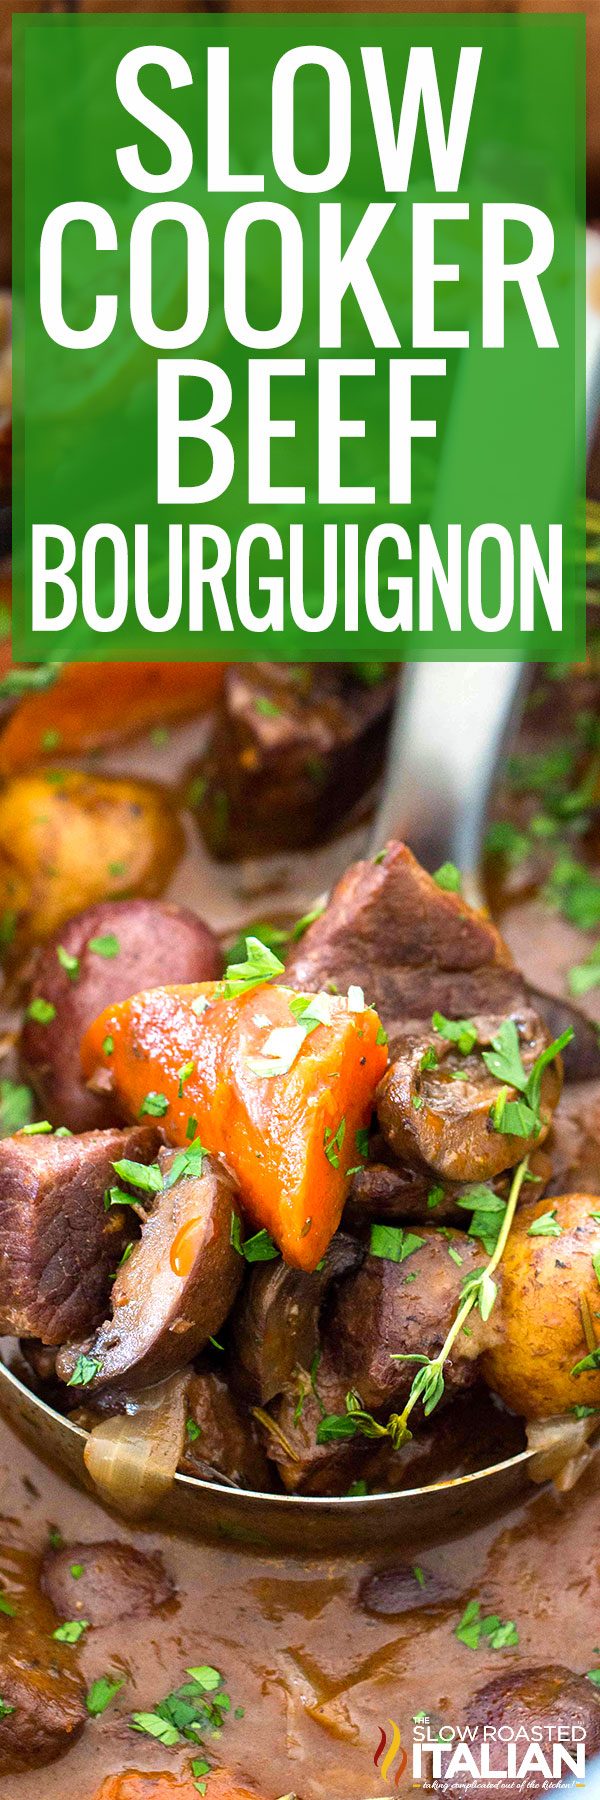 slow cooker beef bourguignon -pin